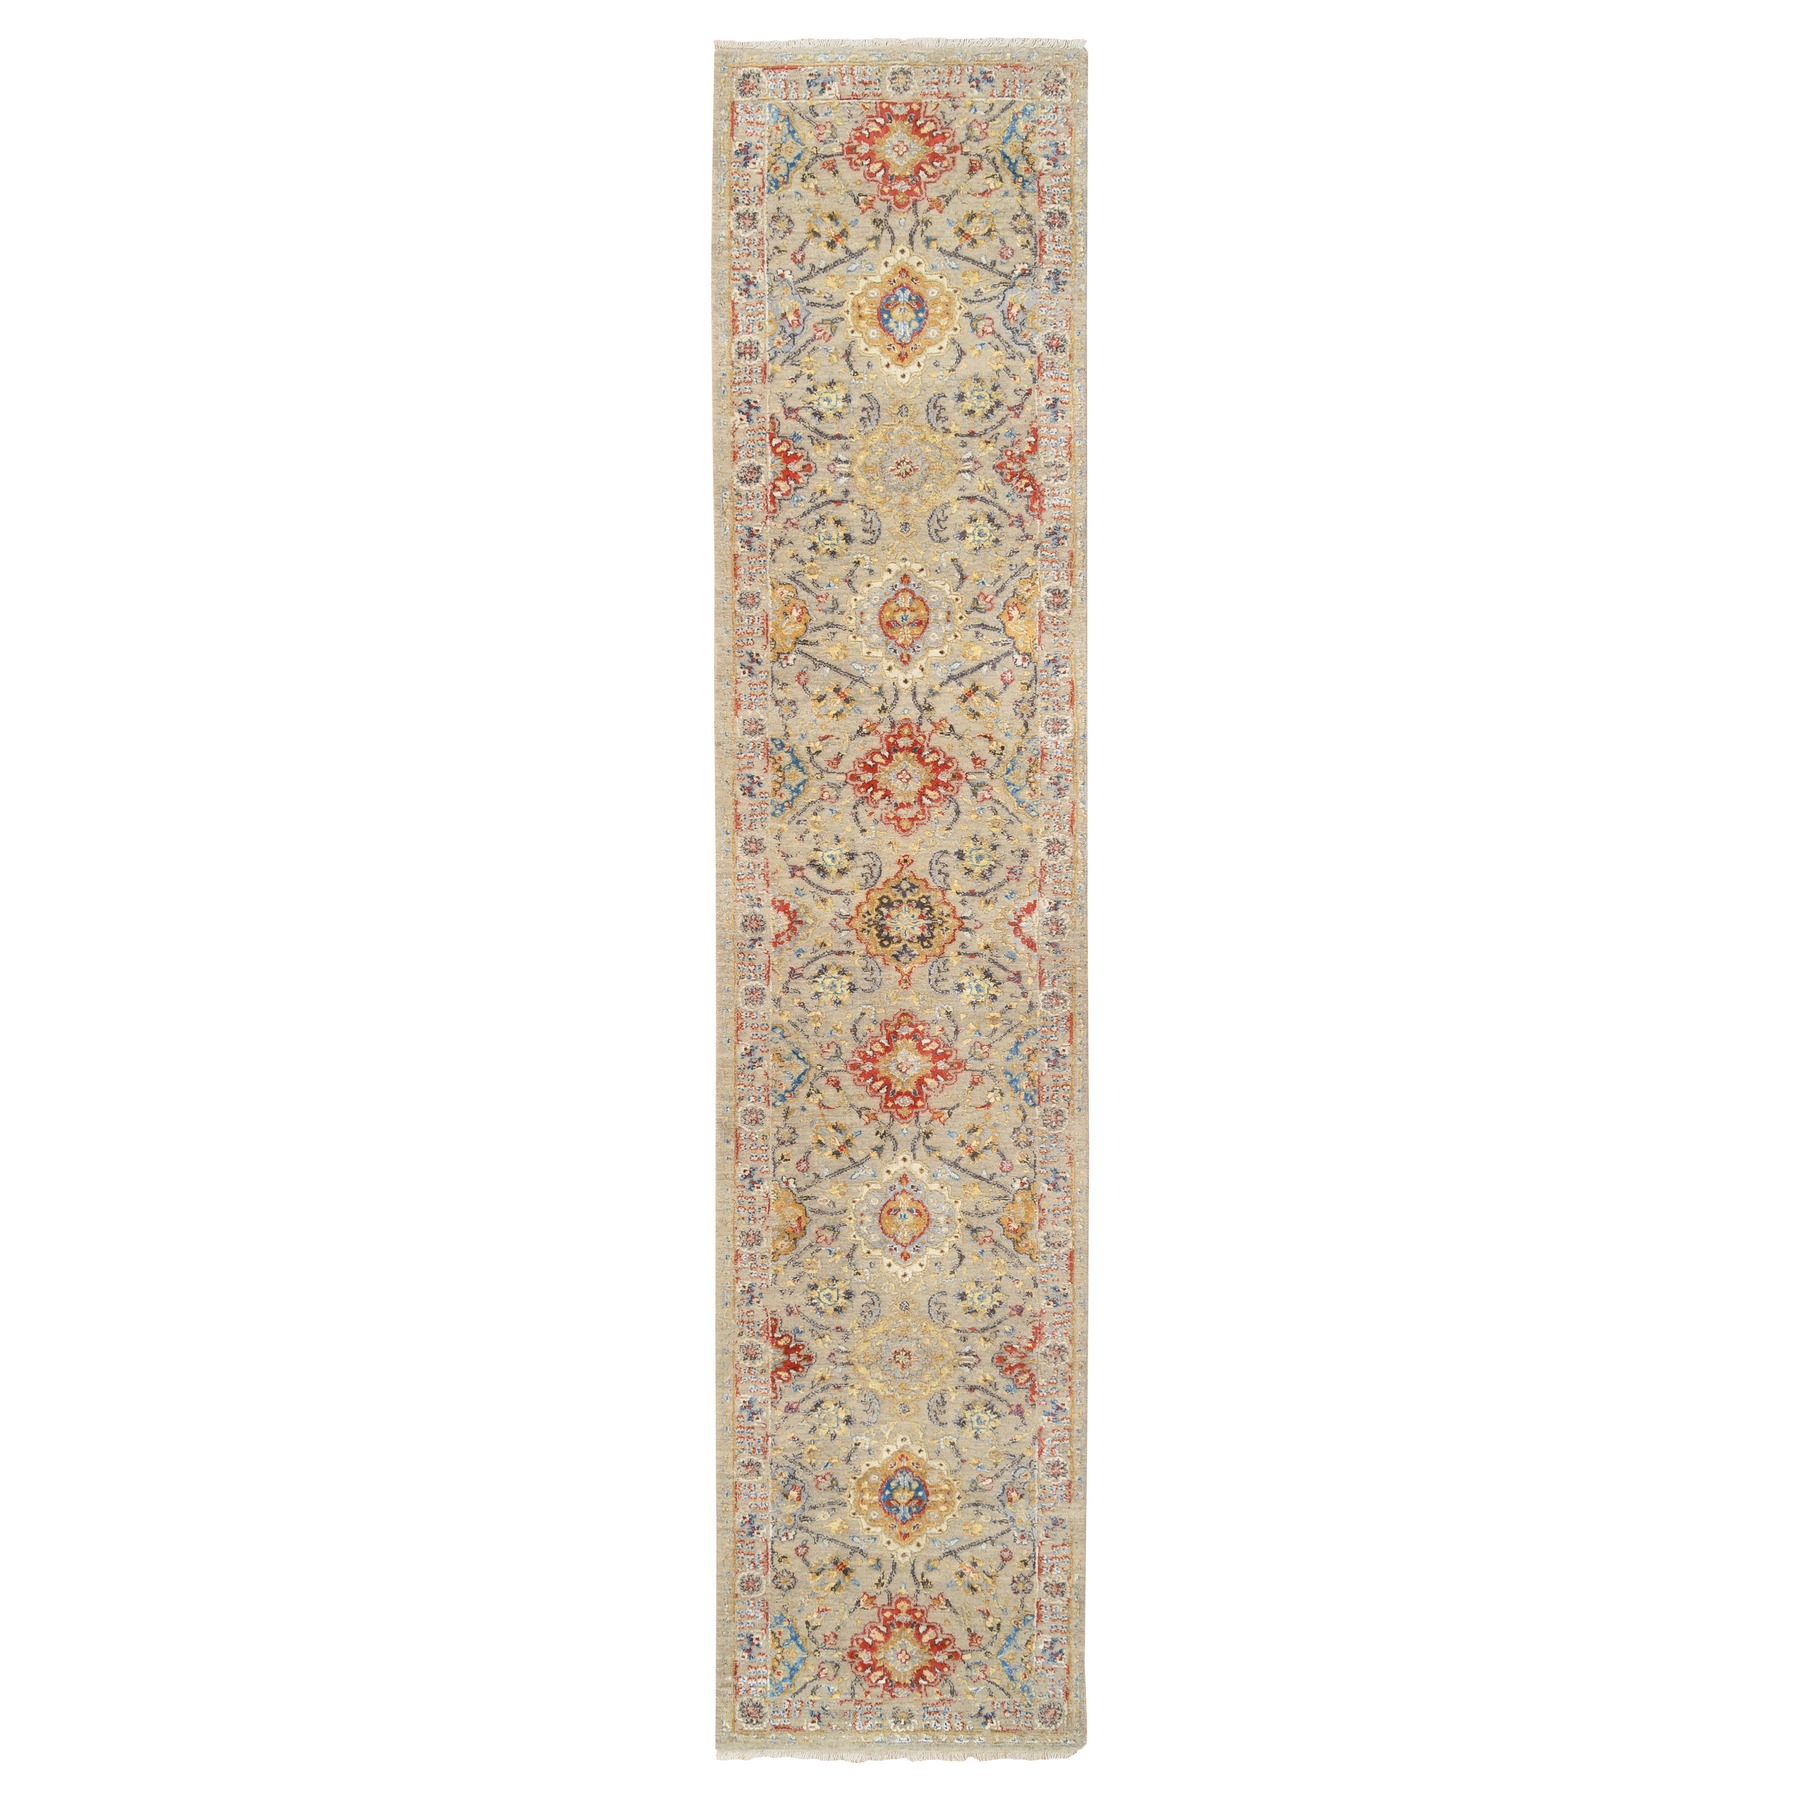 2'6"x12' Beige, THE SUNSET ROSETTES with Soft Colors, Wool and Pure Silk Hand Woven, Runner Oriental Rug 